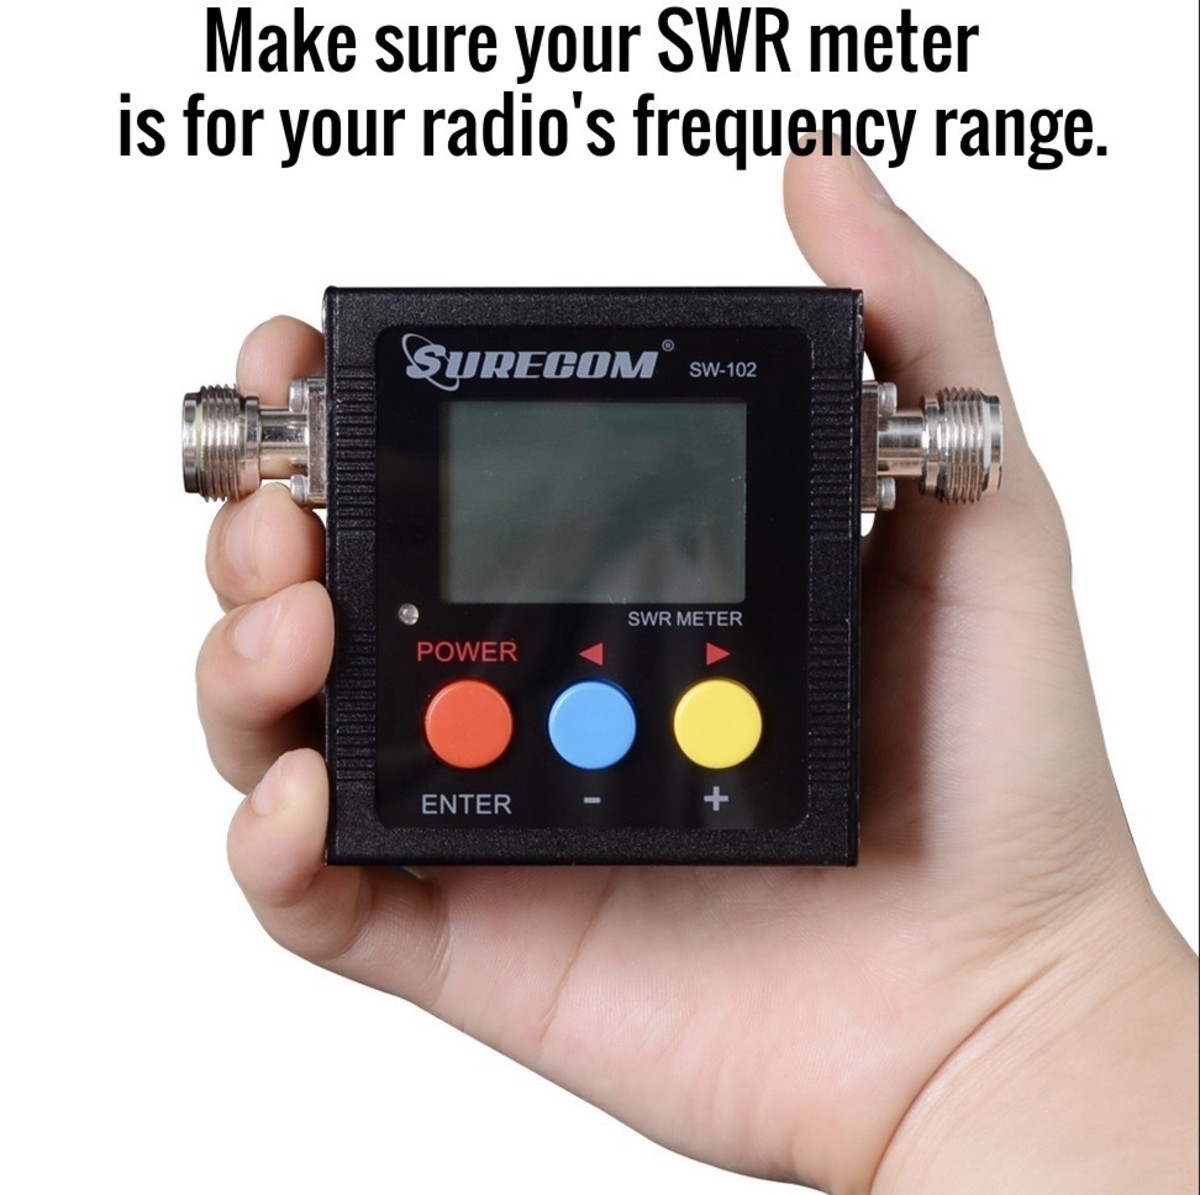 SWR meters made for CB will not work for ham radio and GMRS, and vice versa. 